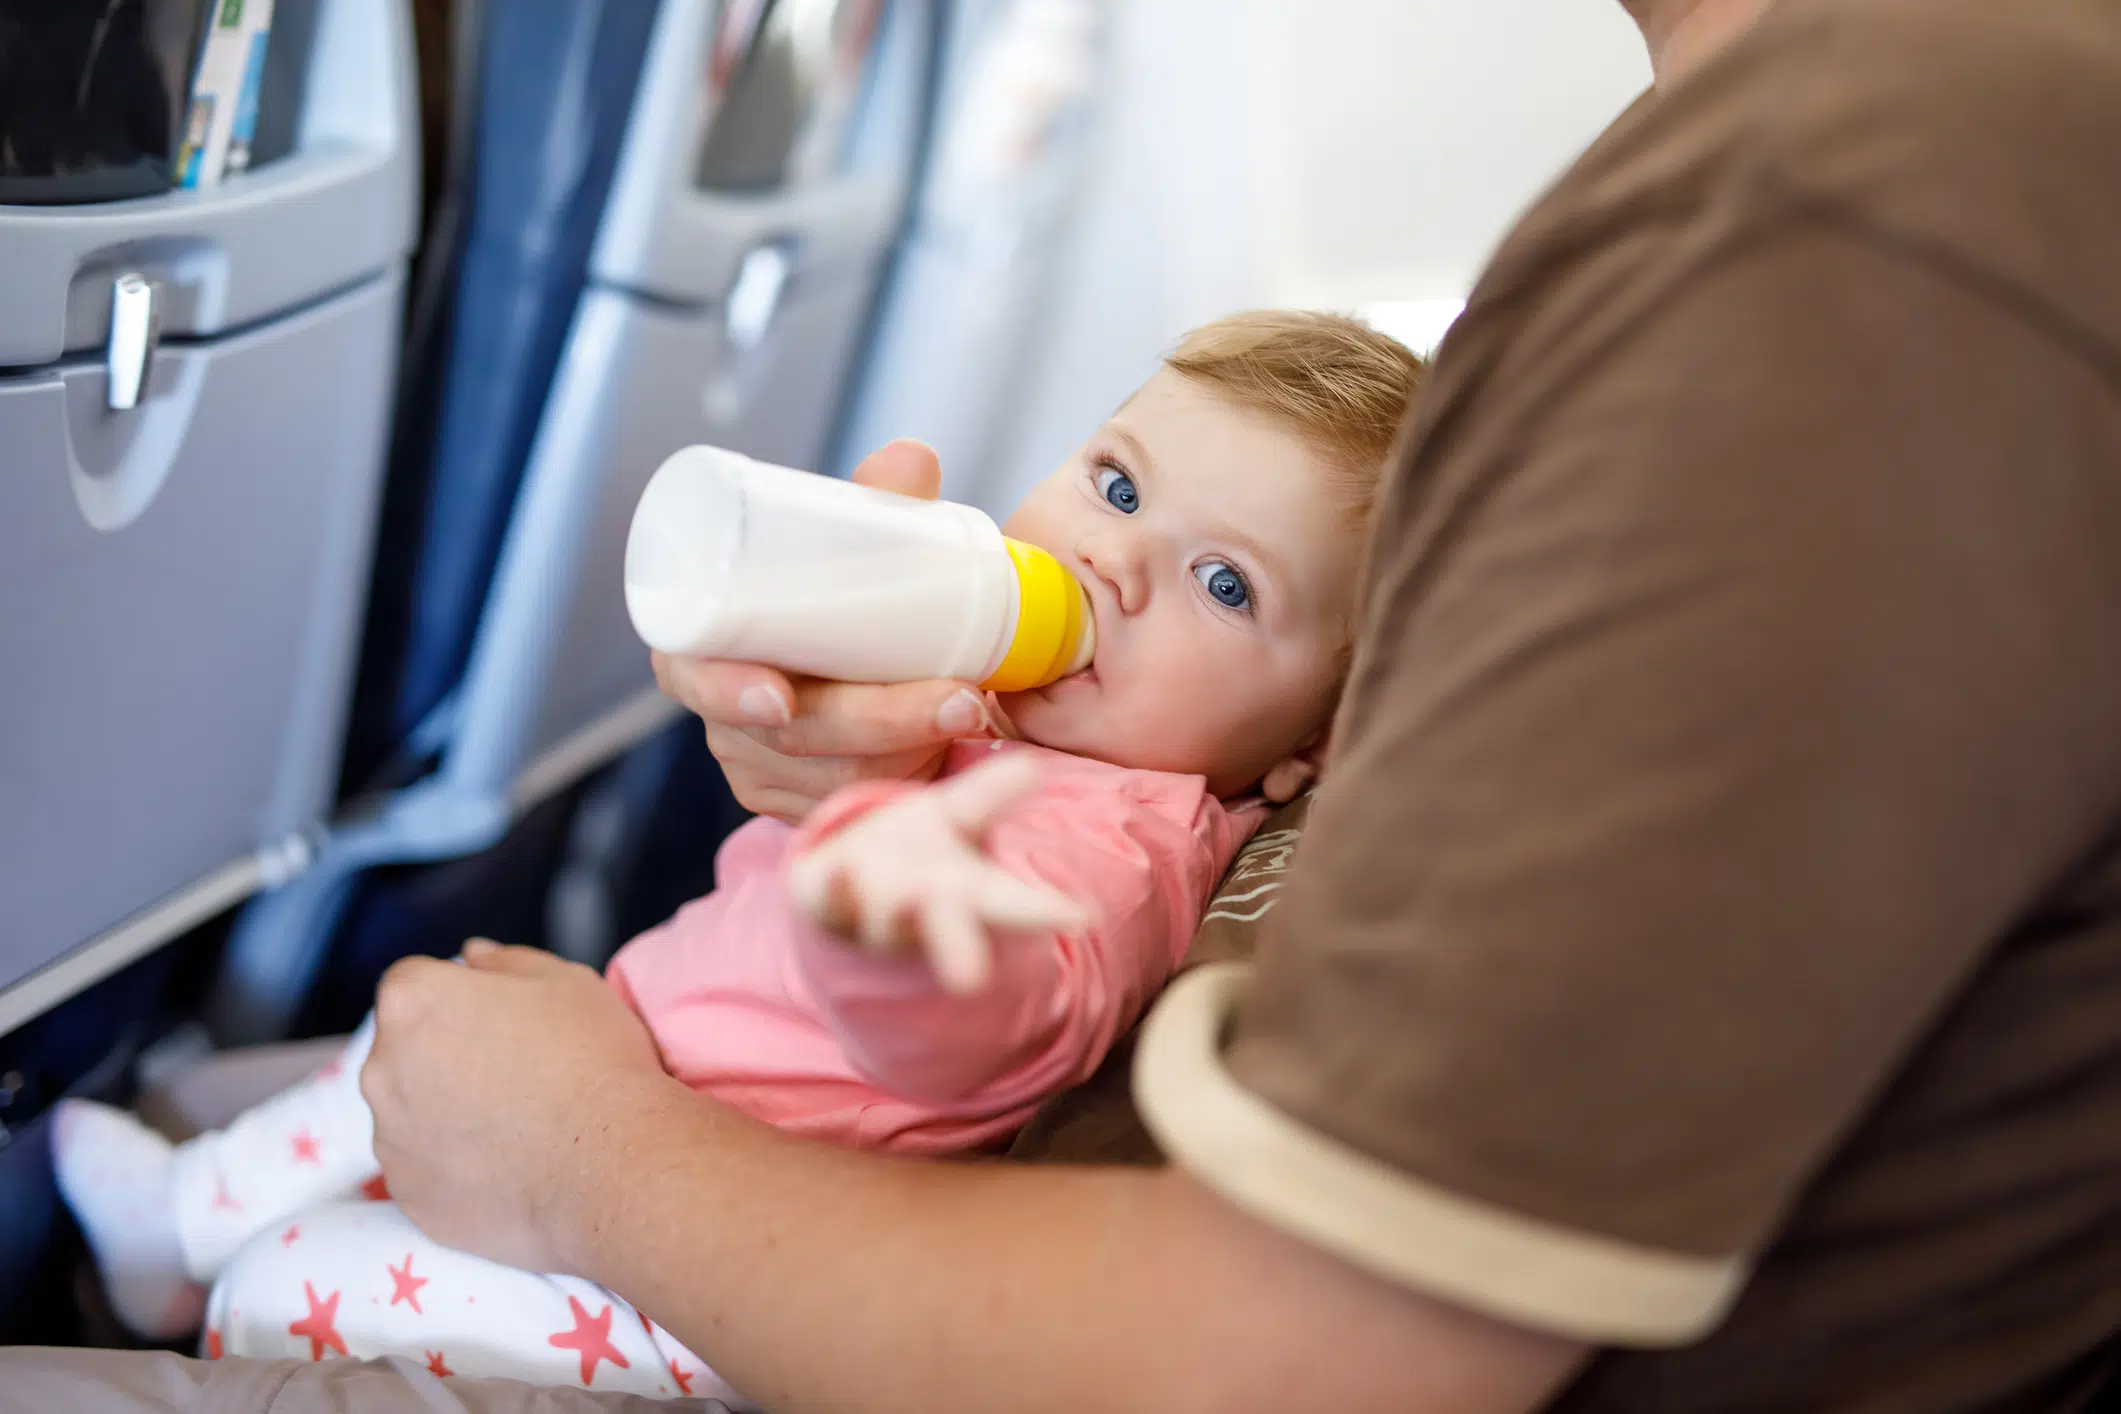 Ten Tips for Flying with a Baby